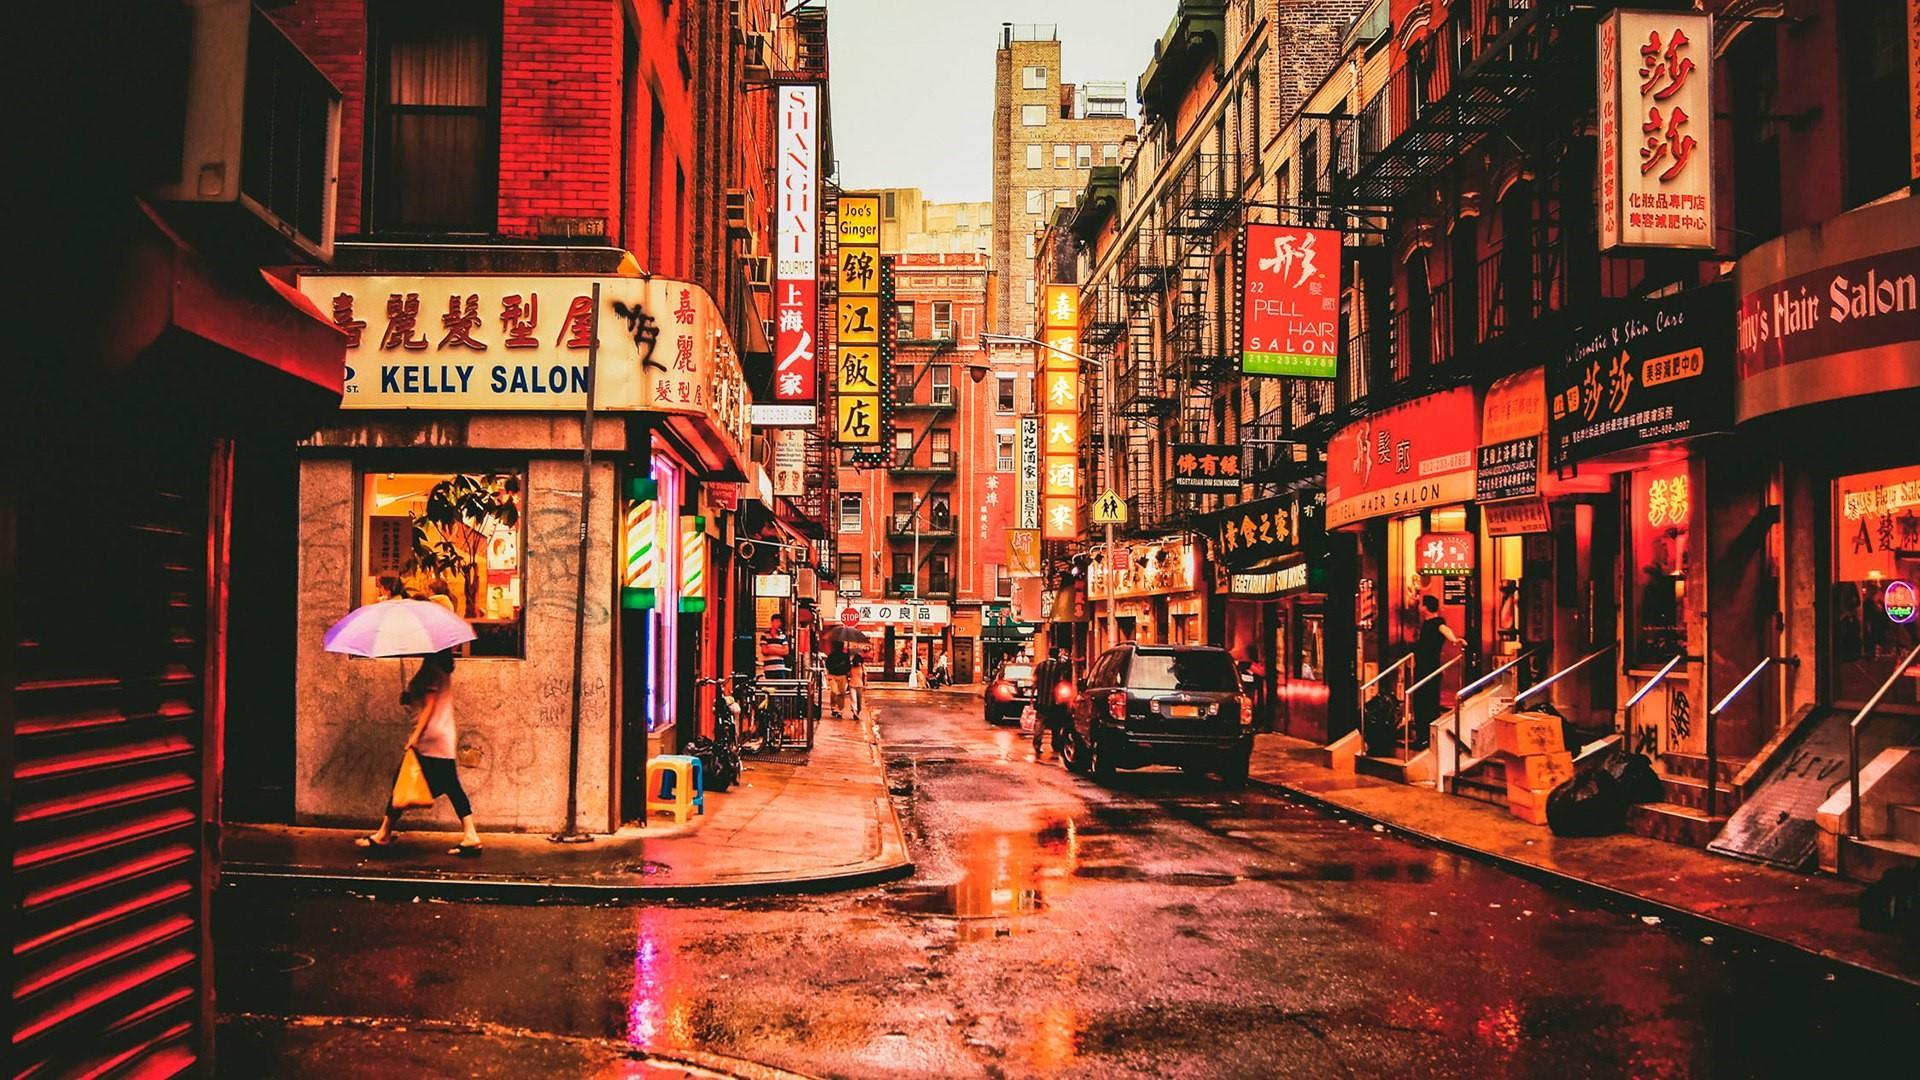 Chinatown Wallpapers Top Free Chinatown Backgrounds Wallpaperaccess